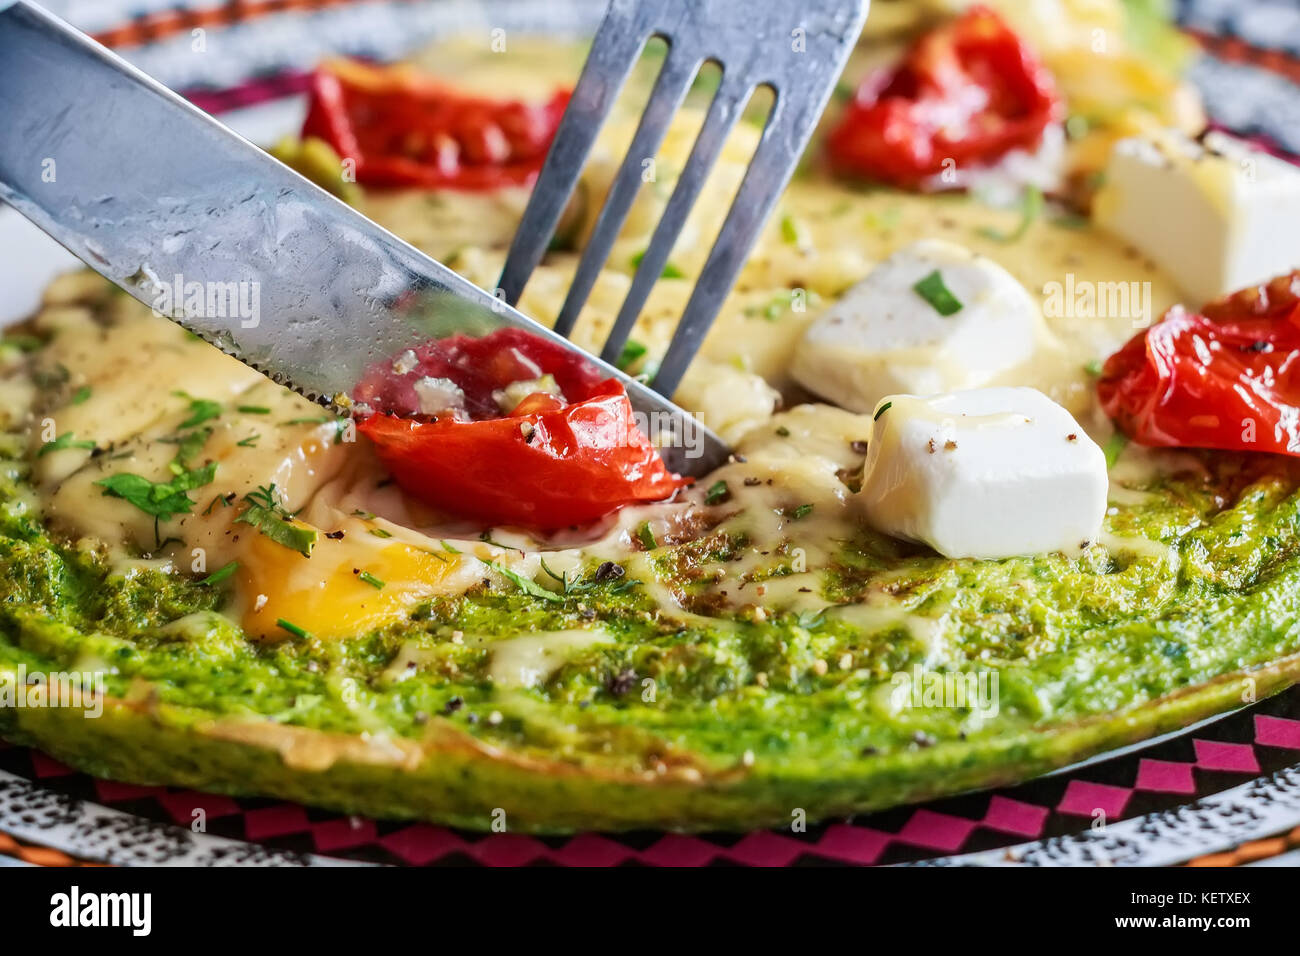 Spinach omelette with tomatoes and cheese on top Stock Photo